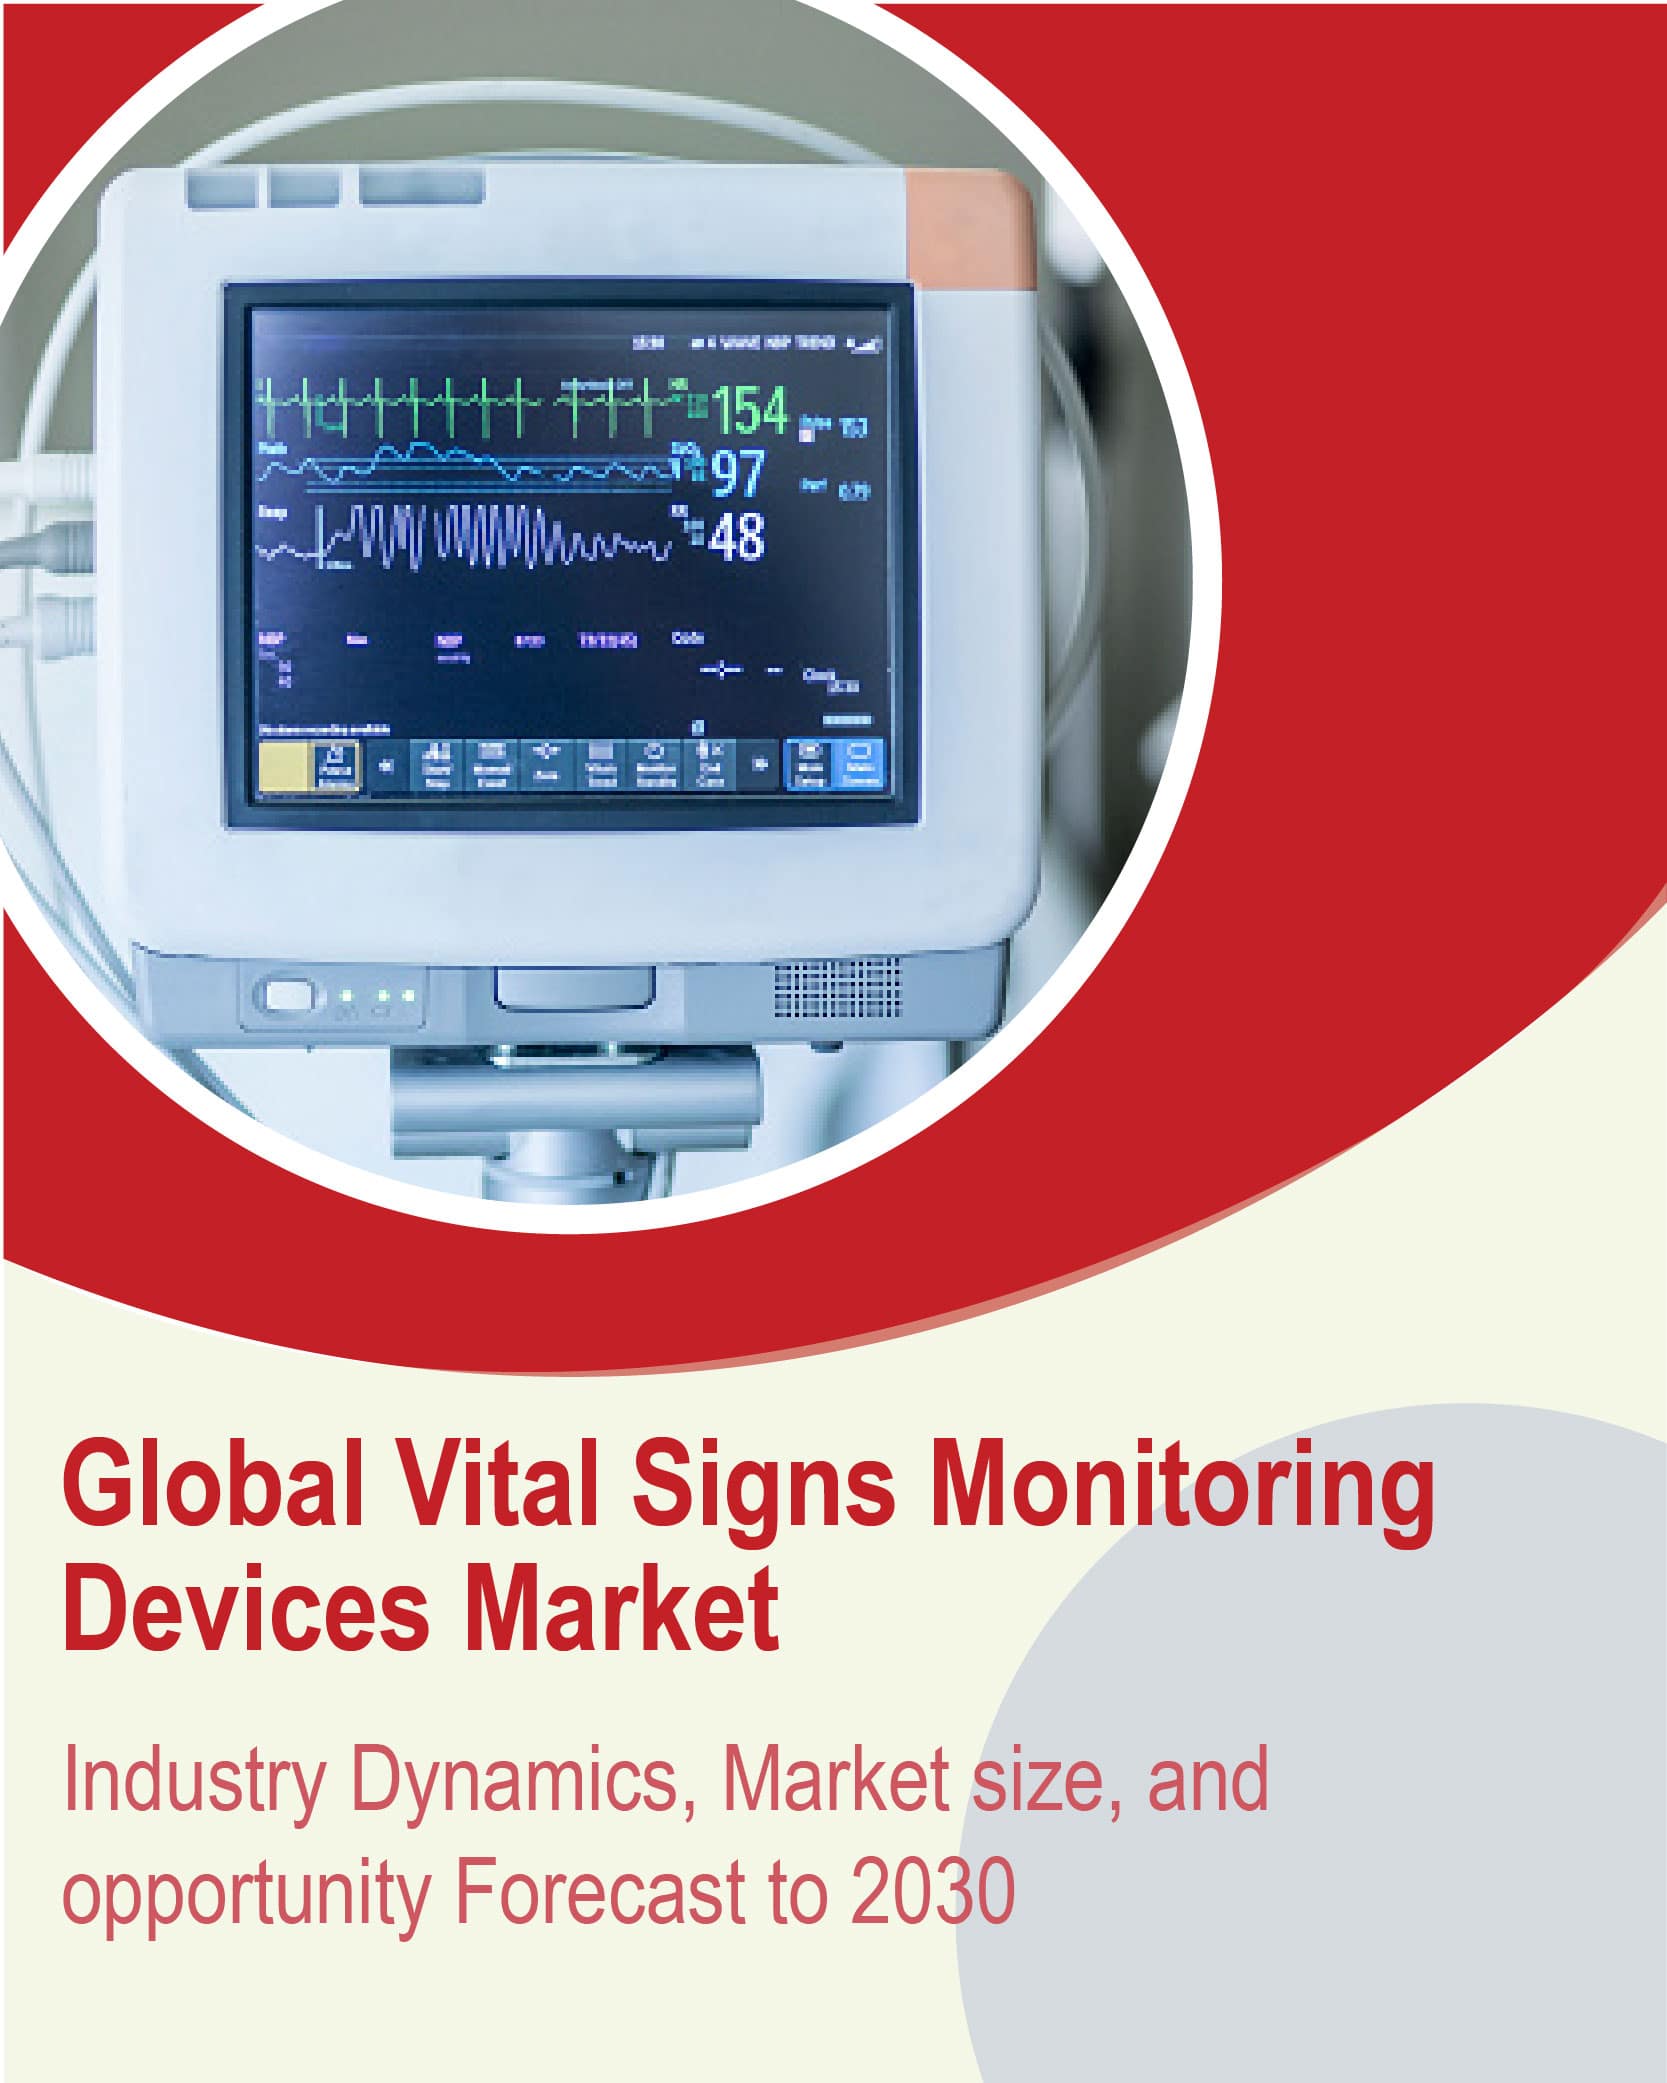 Vital Signs Monitoring Devices Market - Industry Dynamics, Market Size, And Opportunity Forecast To 2030